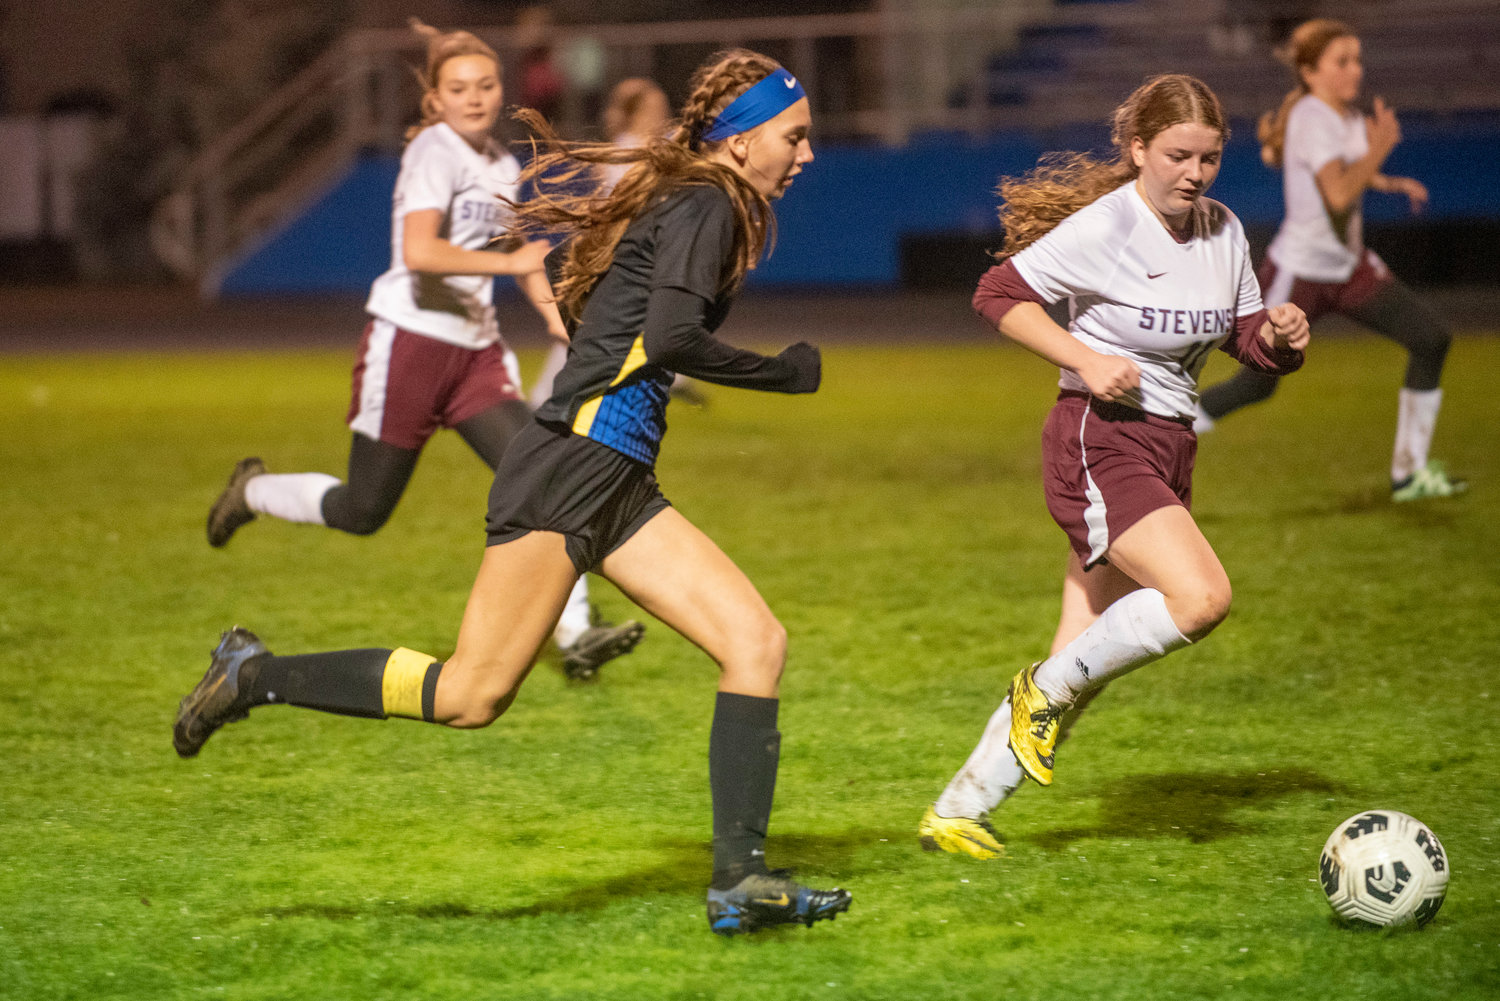 Adna's Faith Wellander races with the ball past Stevenson players during the district playoffs at home Nov. 1.